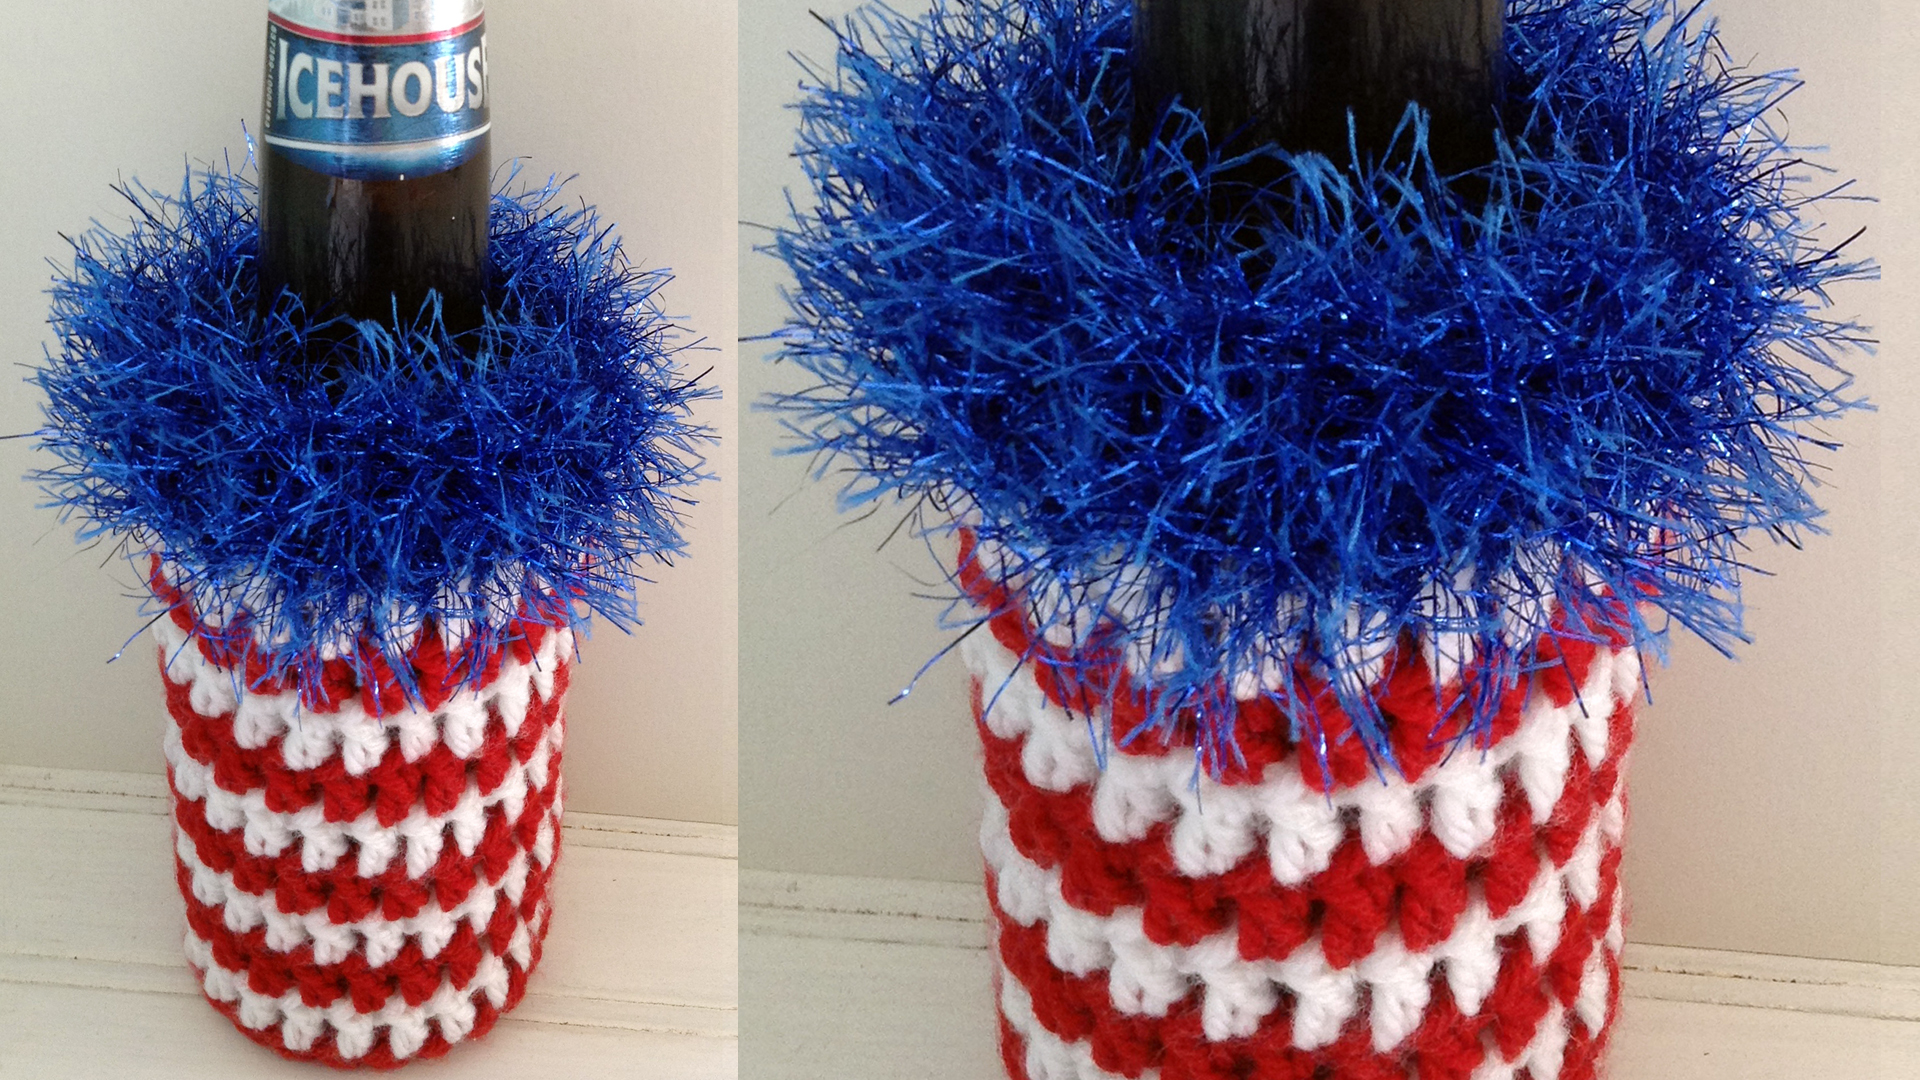 maggies-crochet-4th-of-july-beer-cozy-free-pattern-close-up